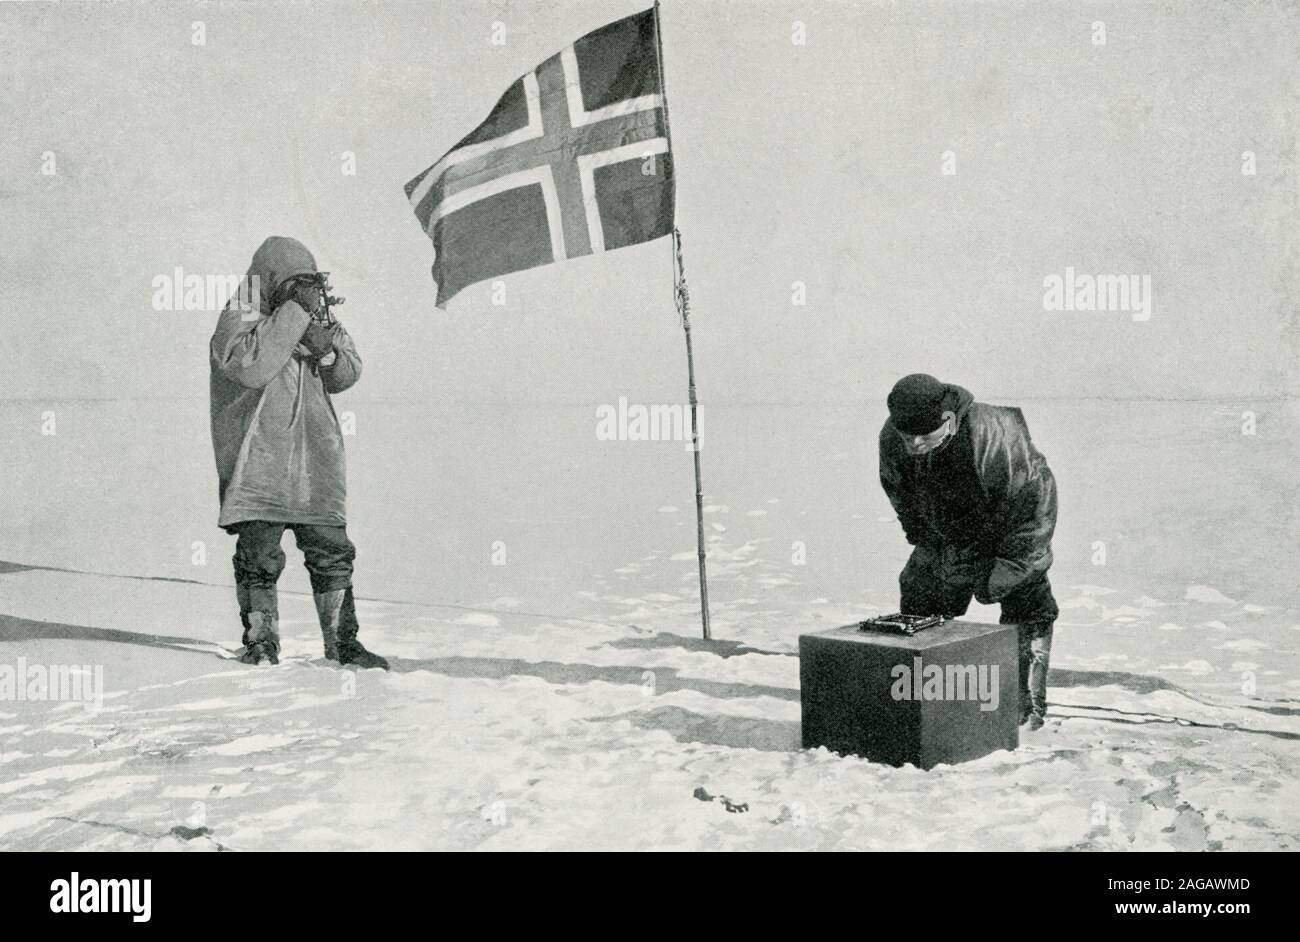 This photo shows Captain Roald Amundsen Taking Sights at the South Pole. The caption continues from a photograph, by permission of Mr. John Murray and the Illustrated London News.  Amundsen was a Norwegian explorer of polar regions and a key figure of the Heroic Age of Antarctic Exploration. He led the first expedition to traverse the Northwest Passage by sea, from 1903 to 1906, and the first expedition to the South Pole in 1911. Stock Photo